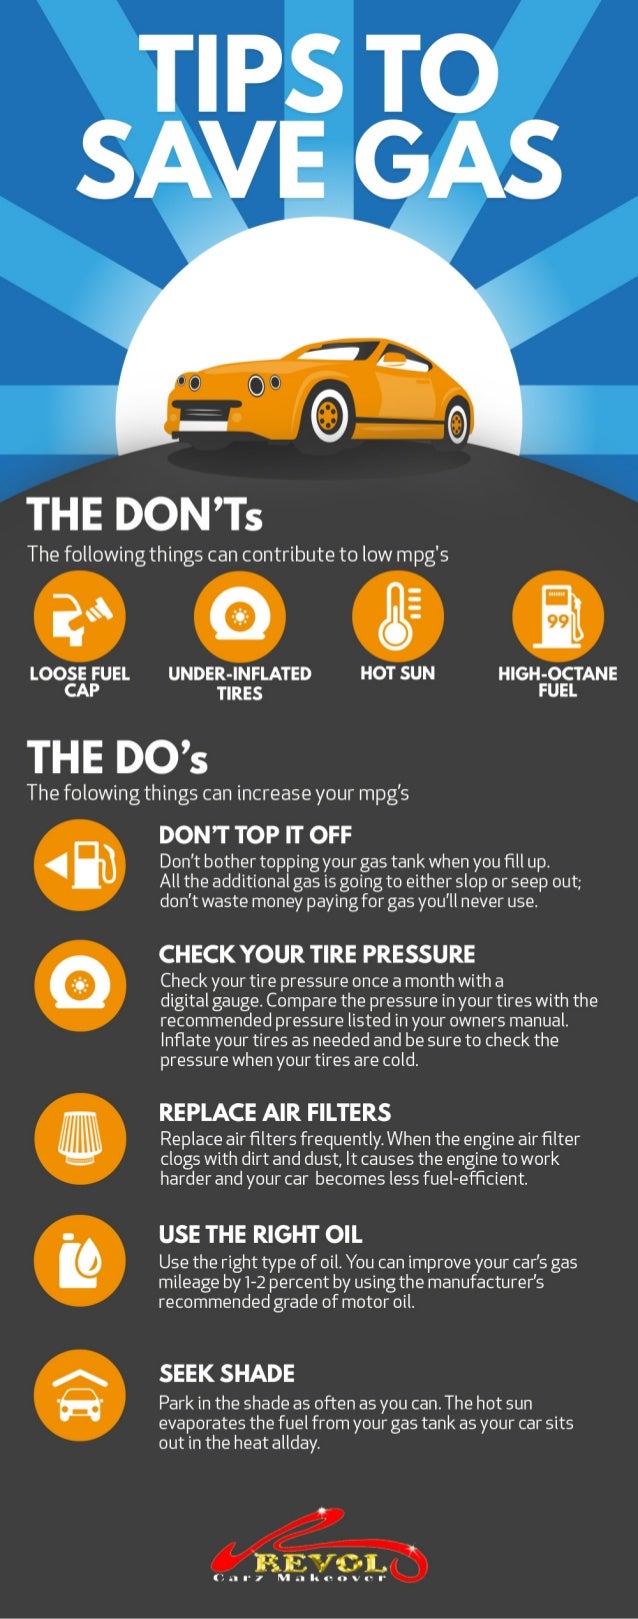 Tips to save gas